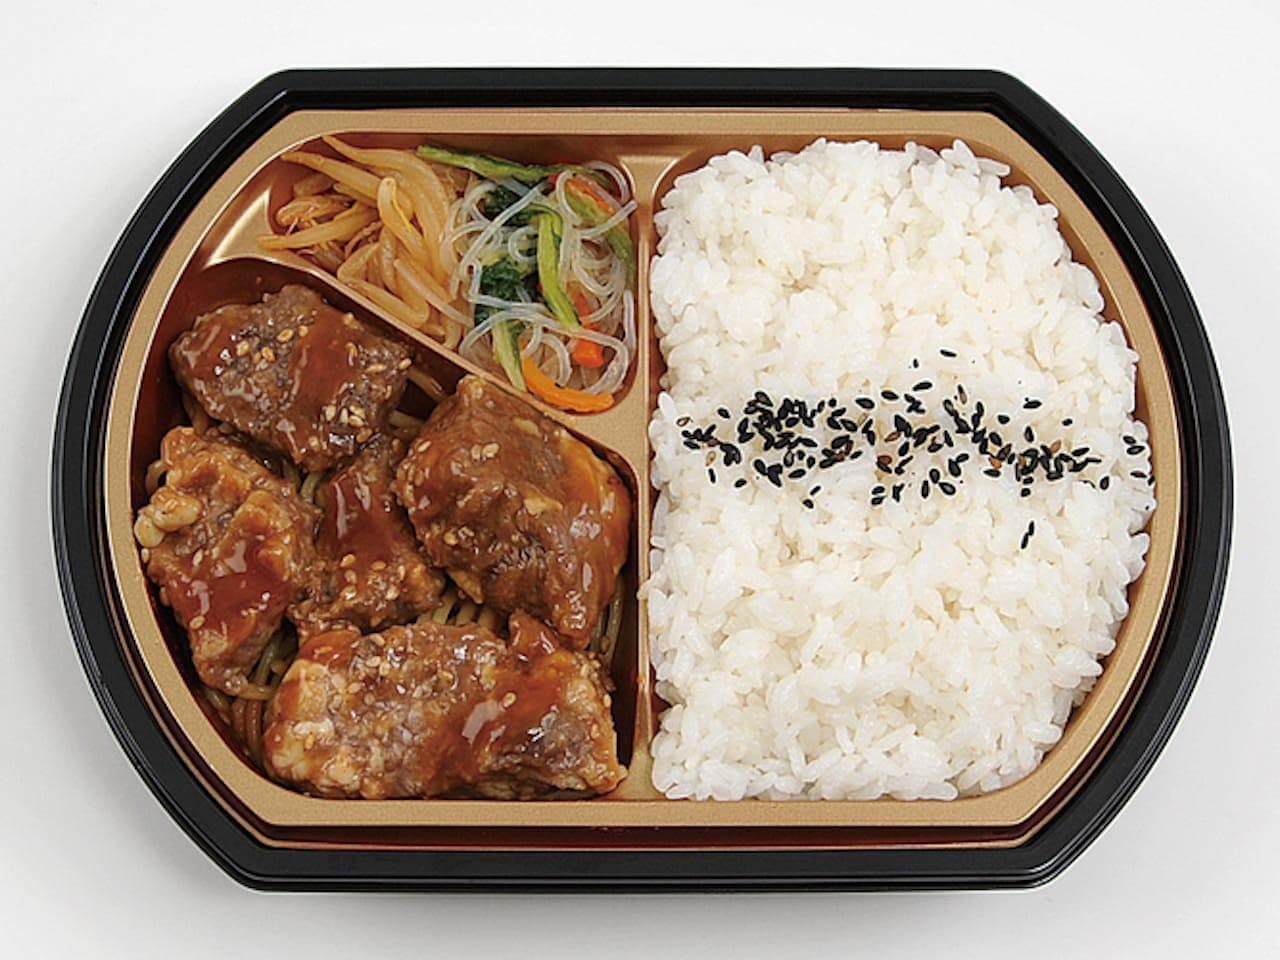 Ministop's new product "Meat is delicious! Medium-sized rib grilled meat lunch box"